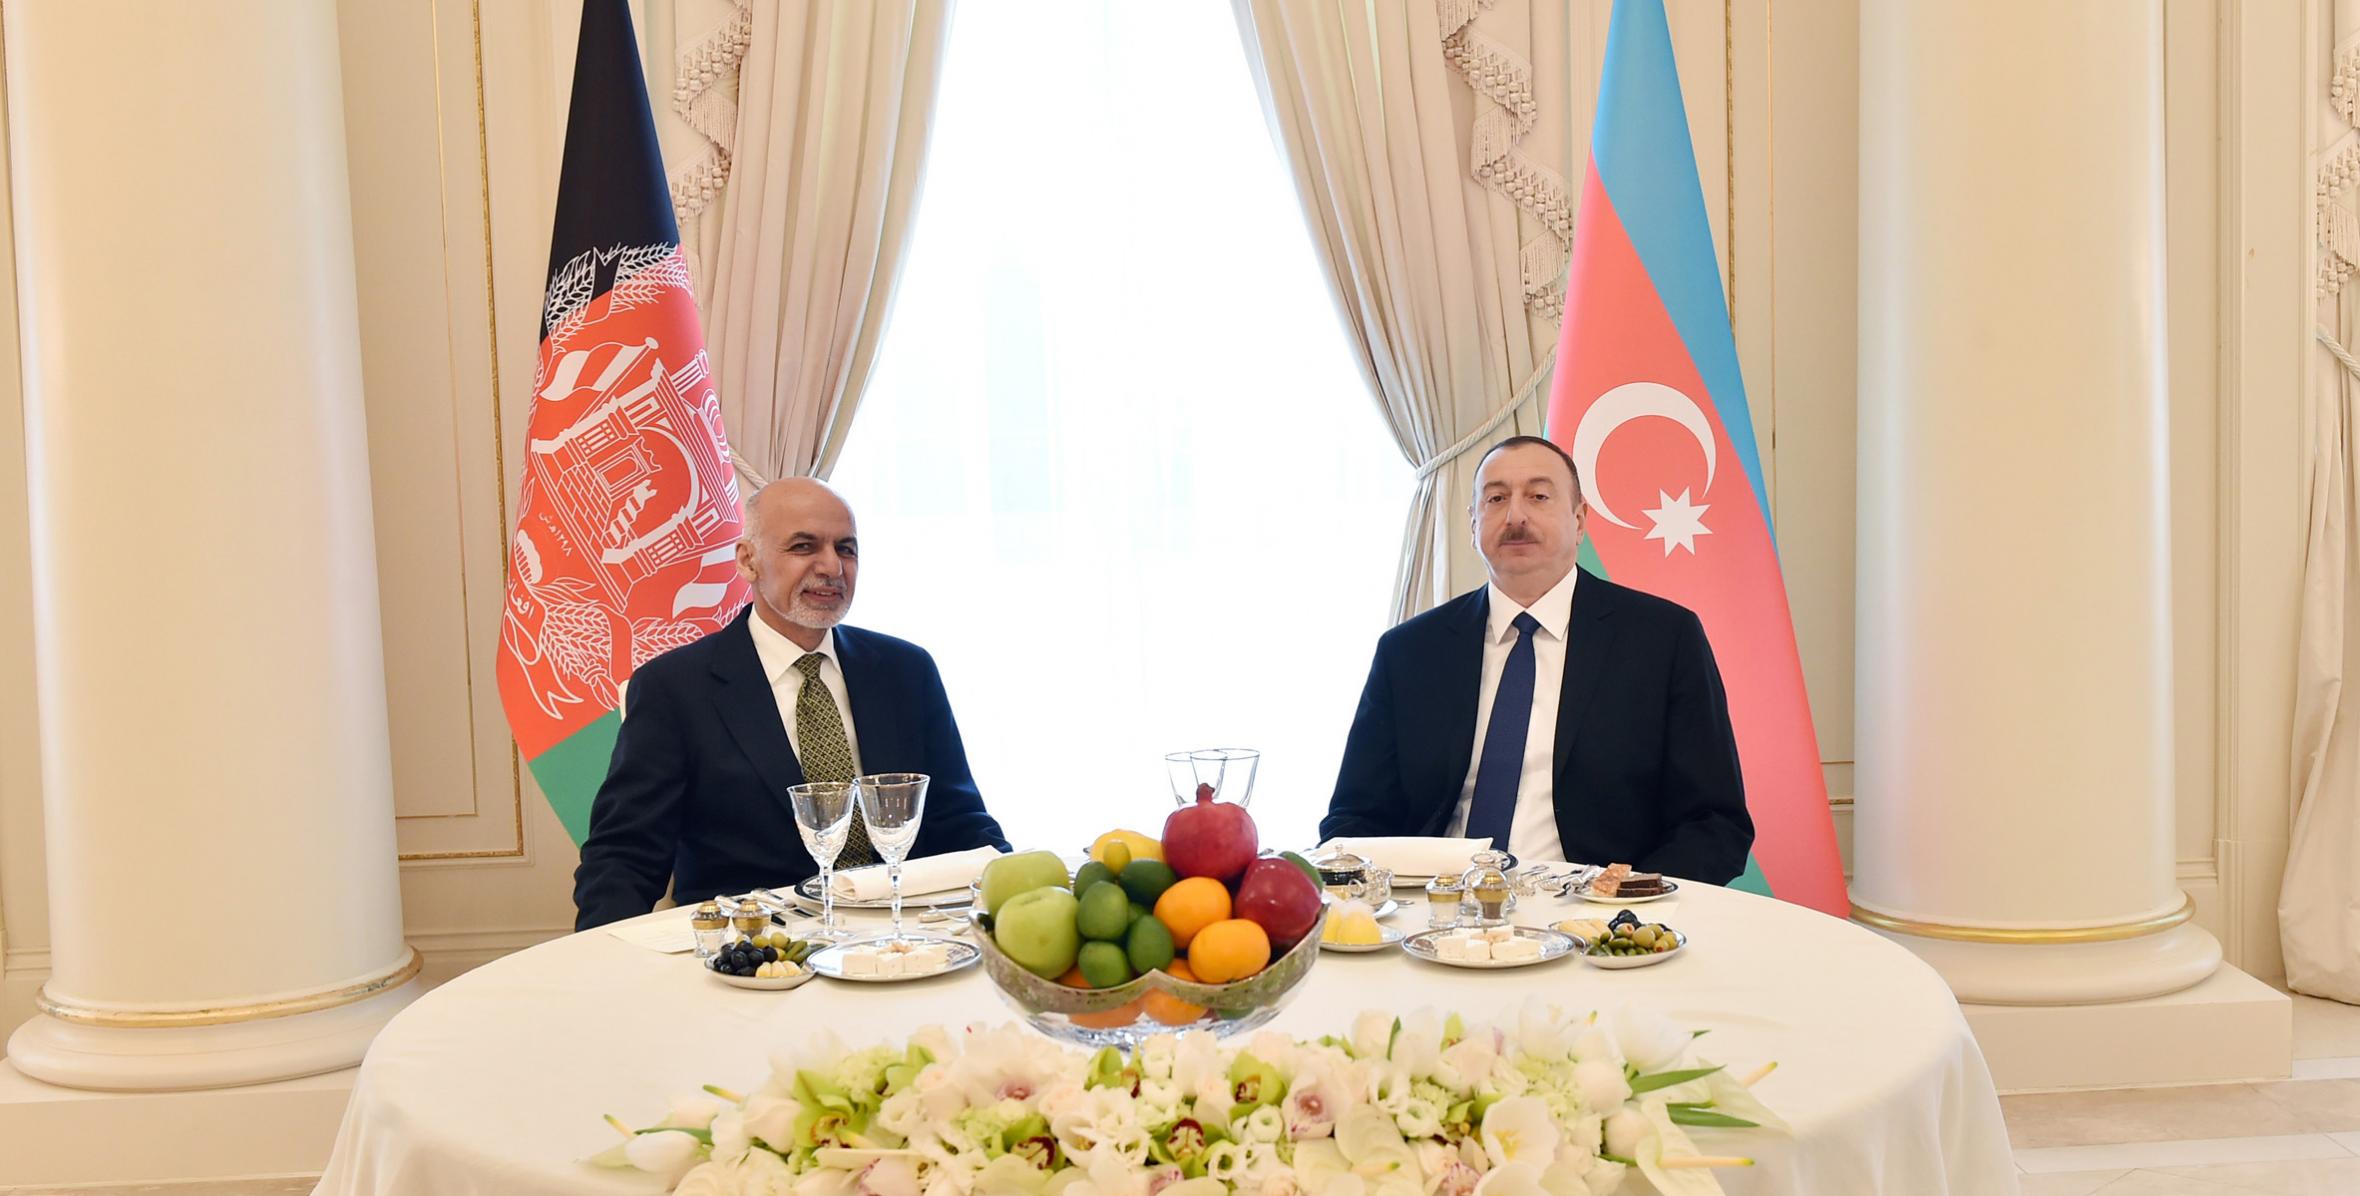 Ilham Aliyev hosted official dinner reception in honor of Afghan President Mohammad Ashraf Ghani